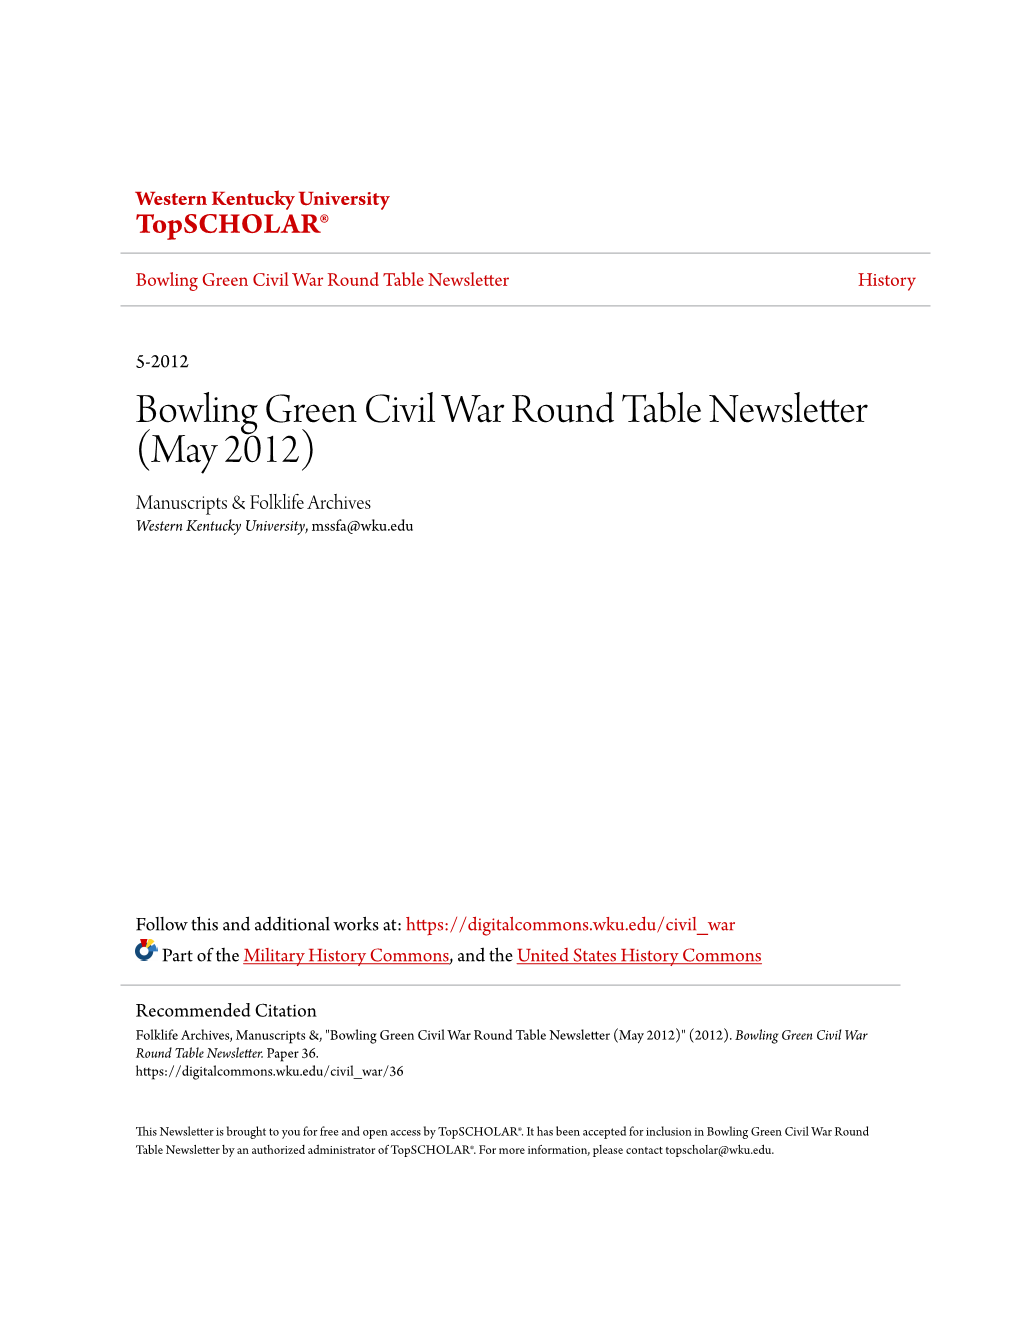 Bowling Green Civil War Round Table Newsletter History